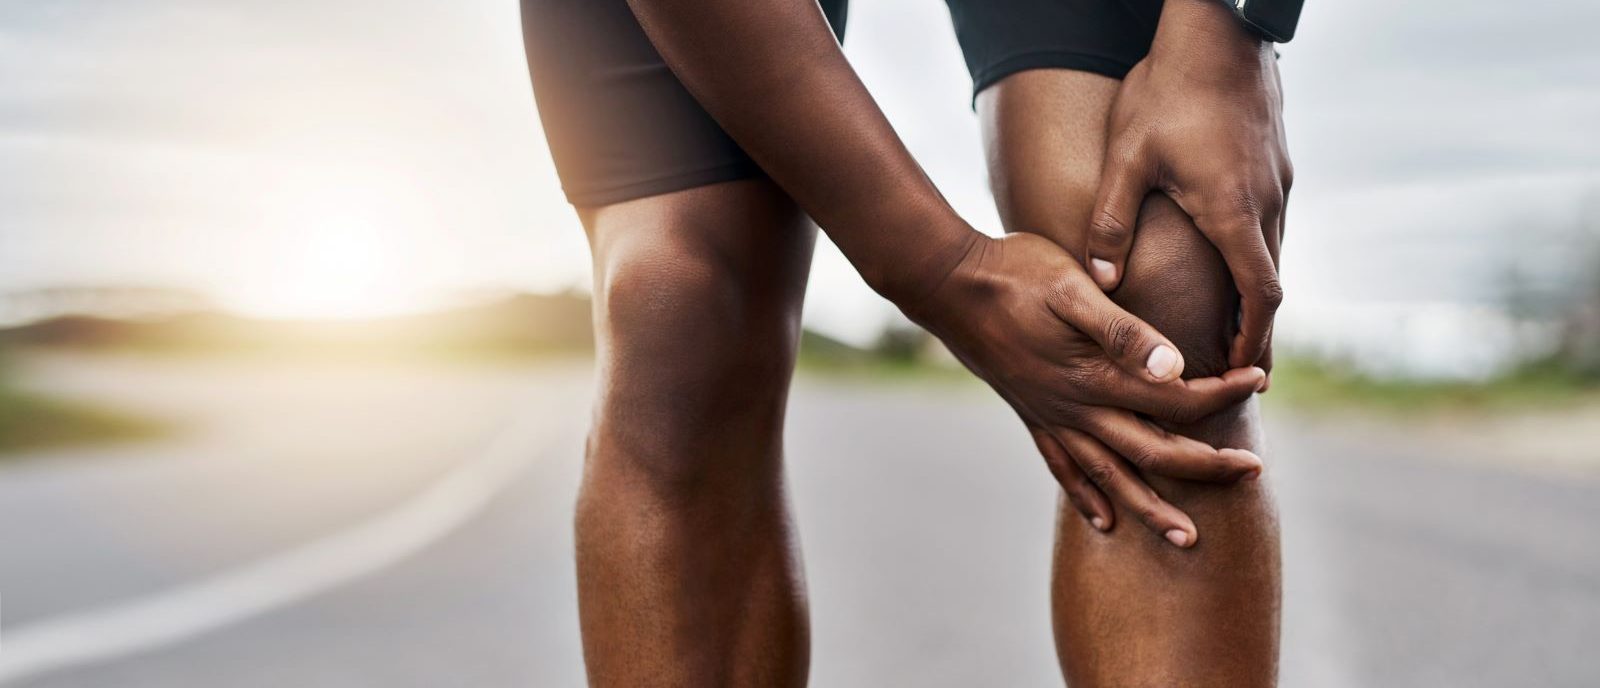 Although running can be bad for the knees, but the benefits often outweigh the risks.